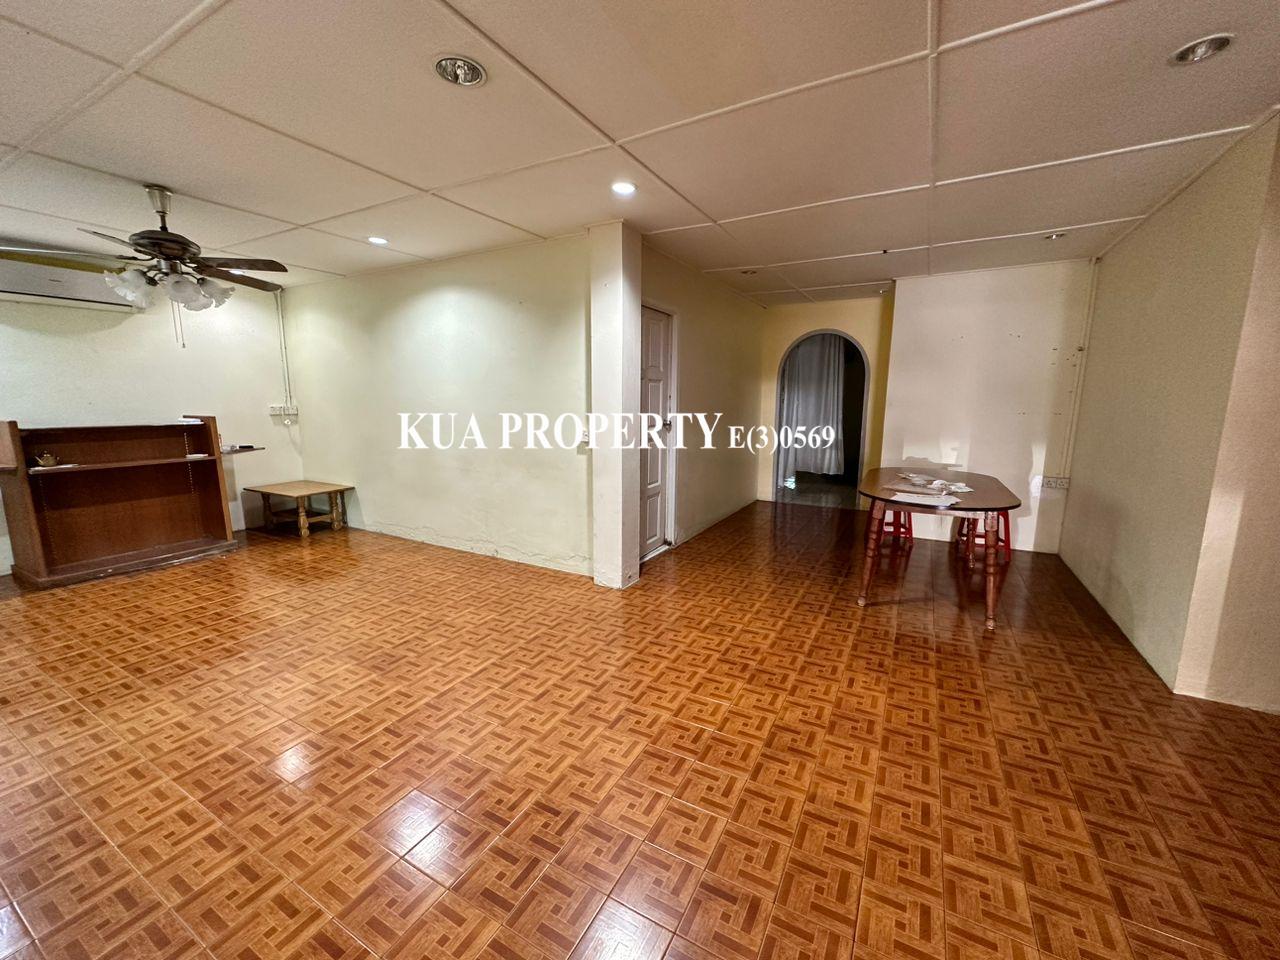 Double storey Detached House FOR RENT! Located at Foochow Road